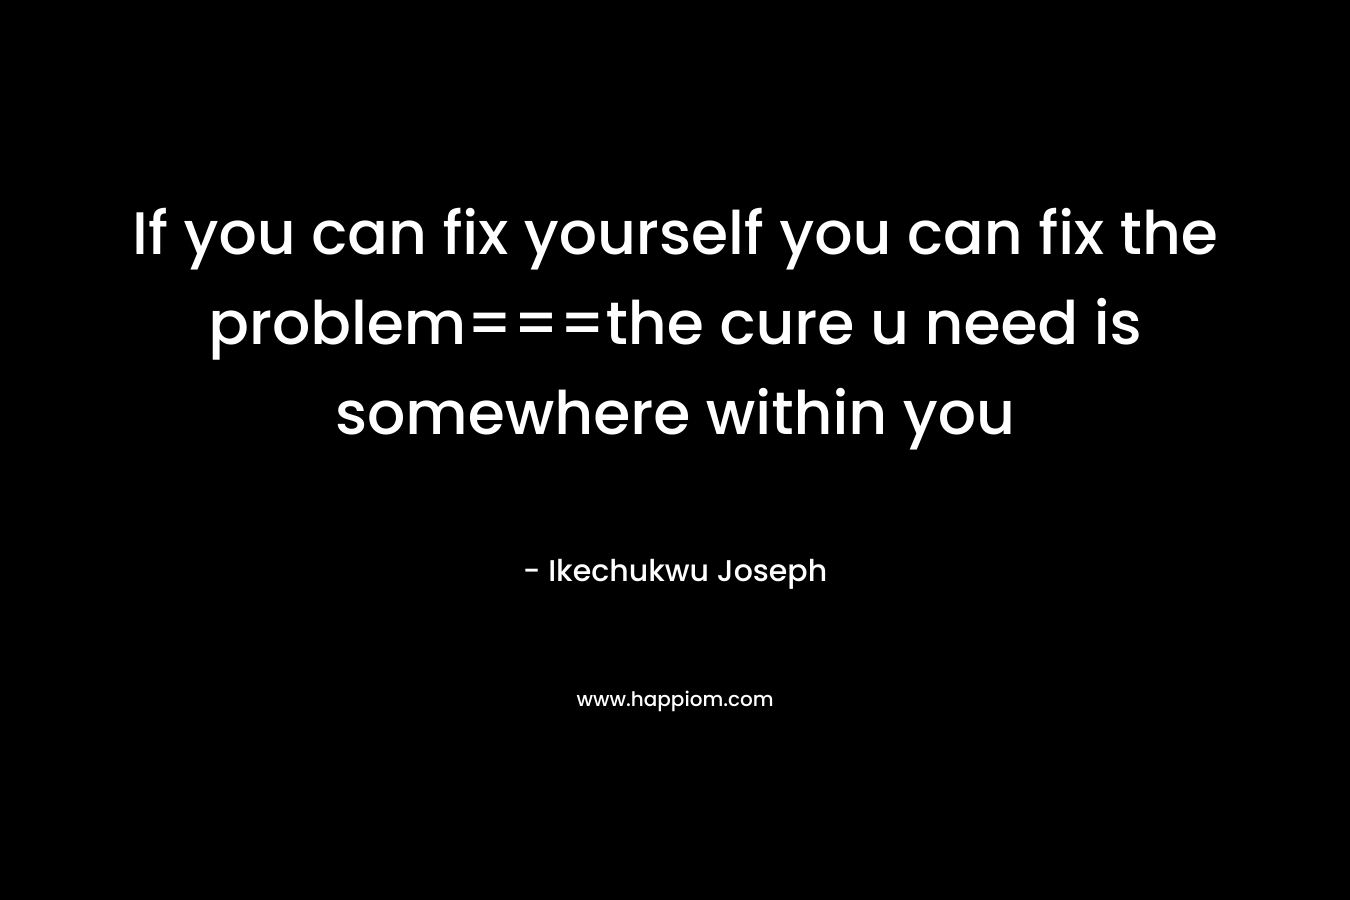 If you can fix yourself you can fix the problem===the cure u need is somewhere within you